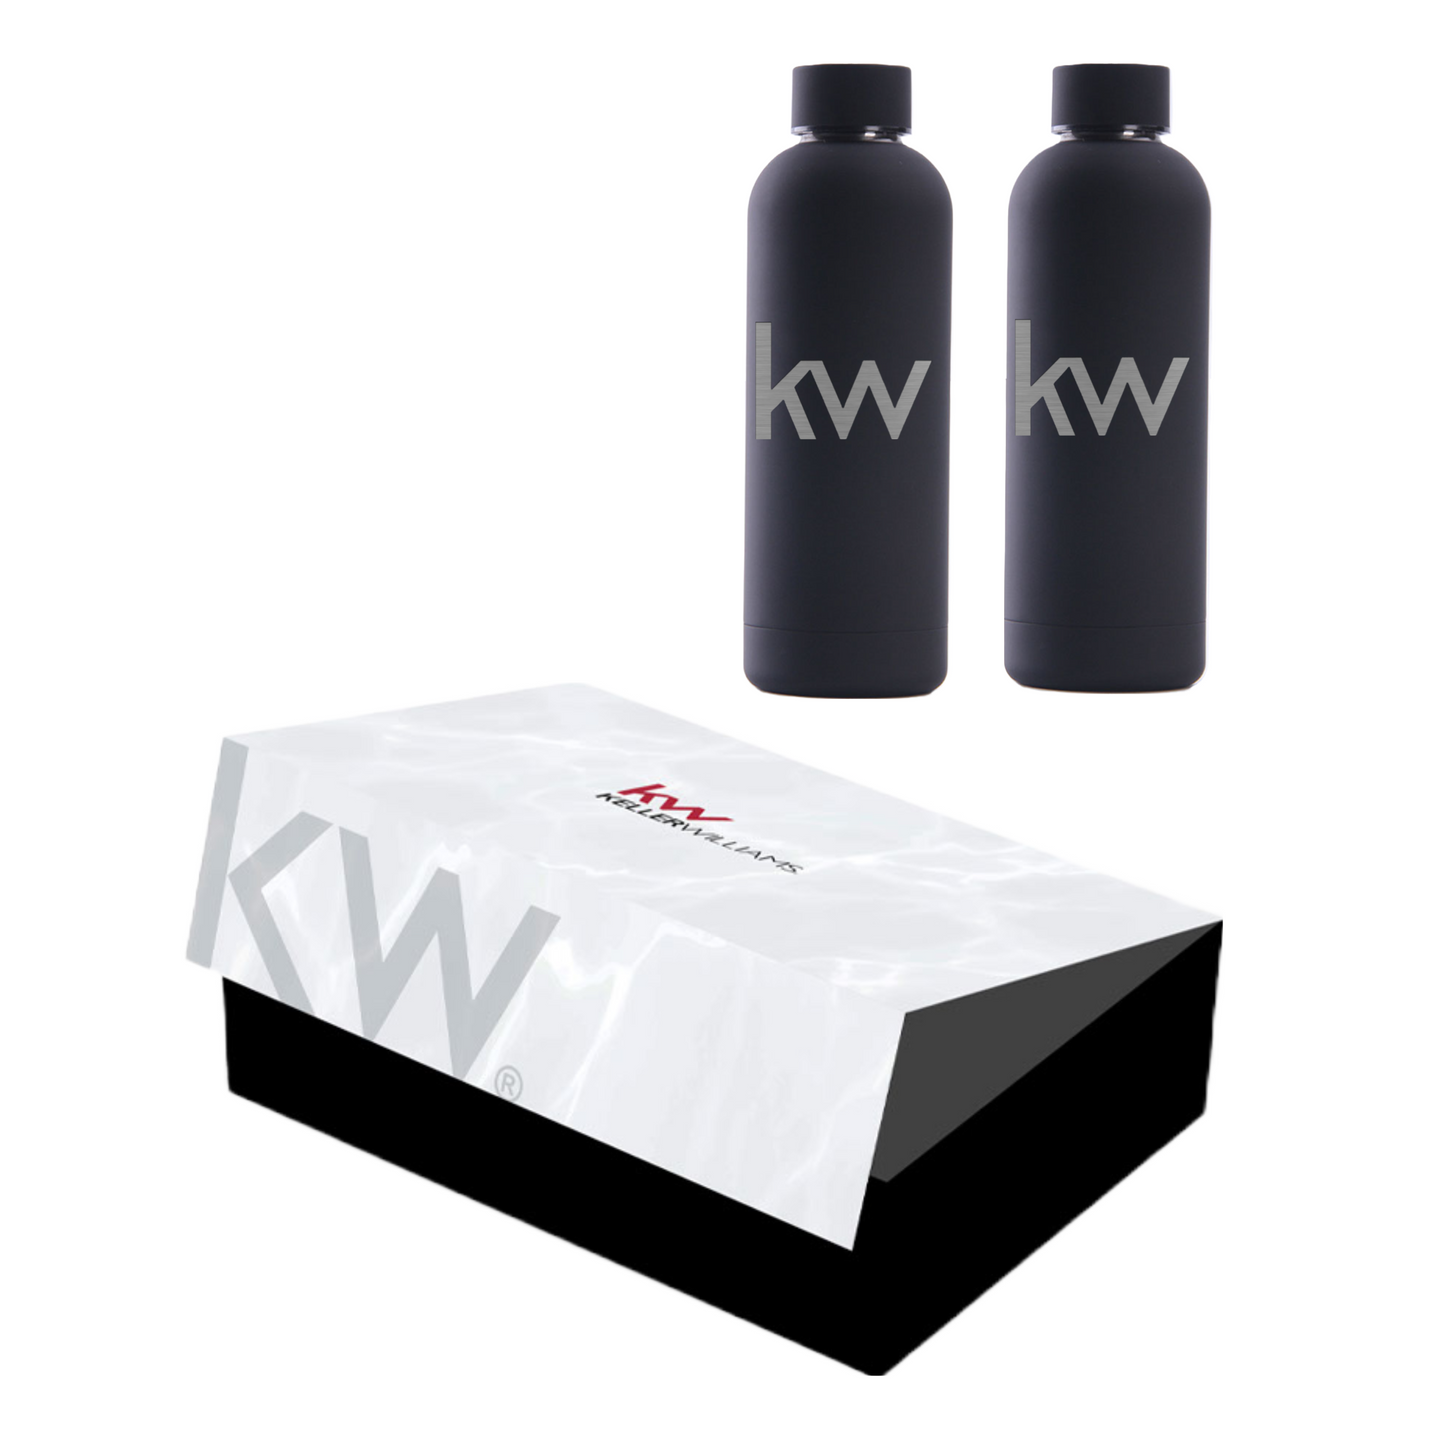 Keller Williams Water Bottles in KW White Marble Gift Box (from $58 per complete box)